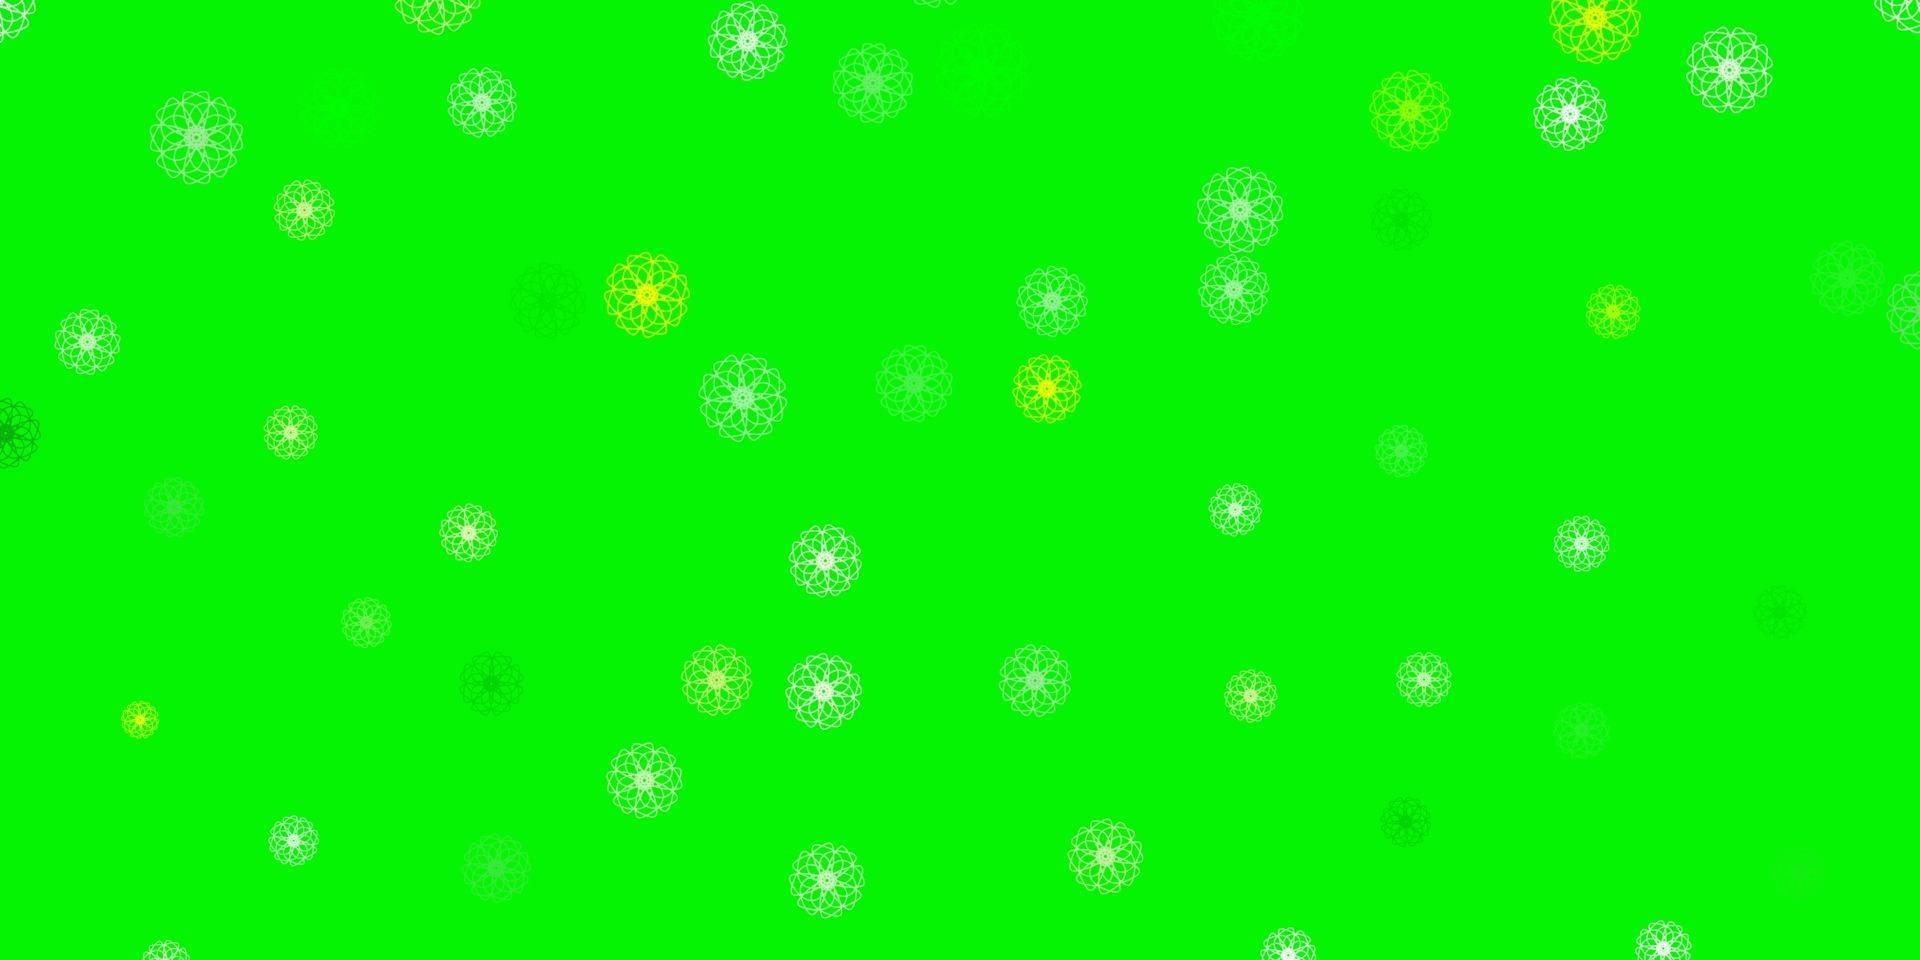 Light green, yellow vector doodle pattern with flowers.